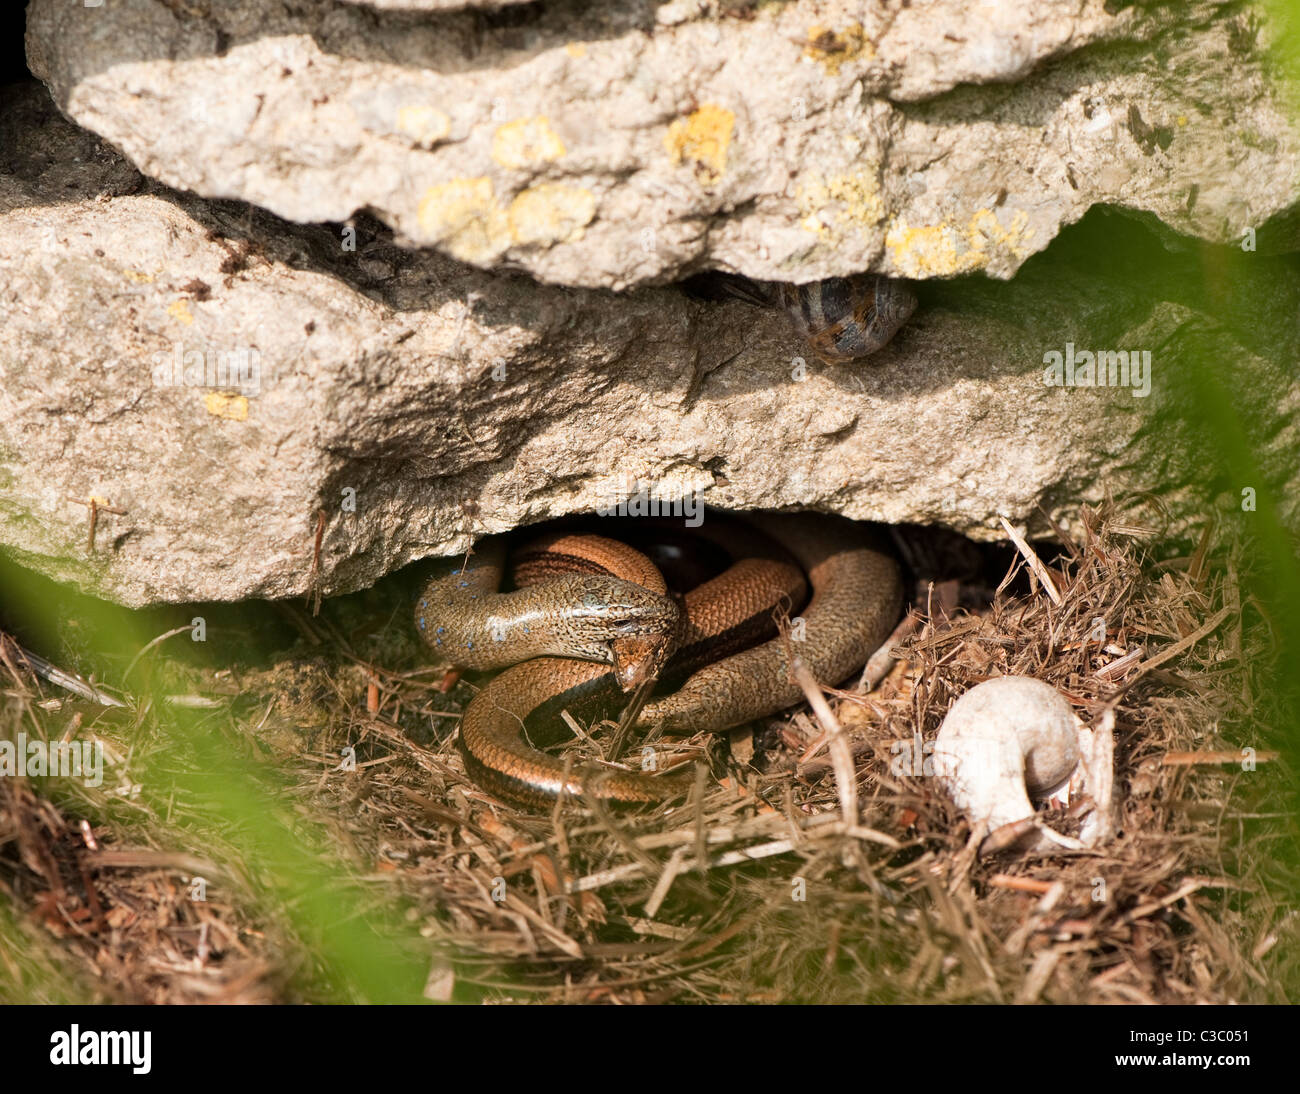 Mating Slow Worms, Anguis fragilis Stock Photo